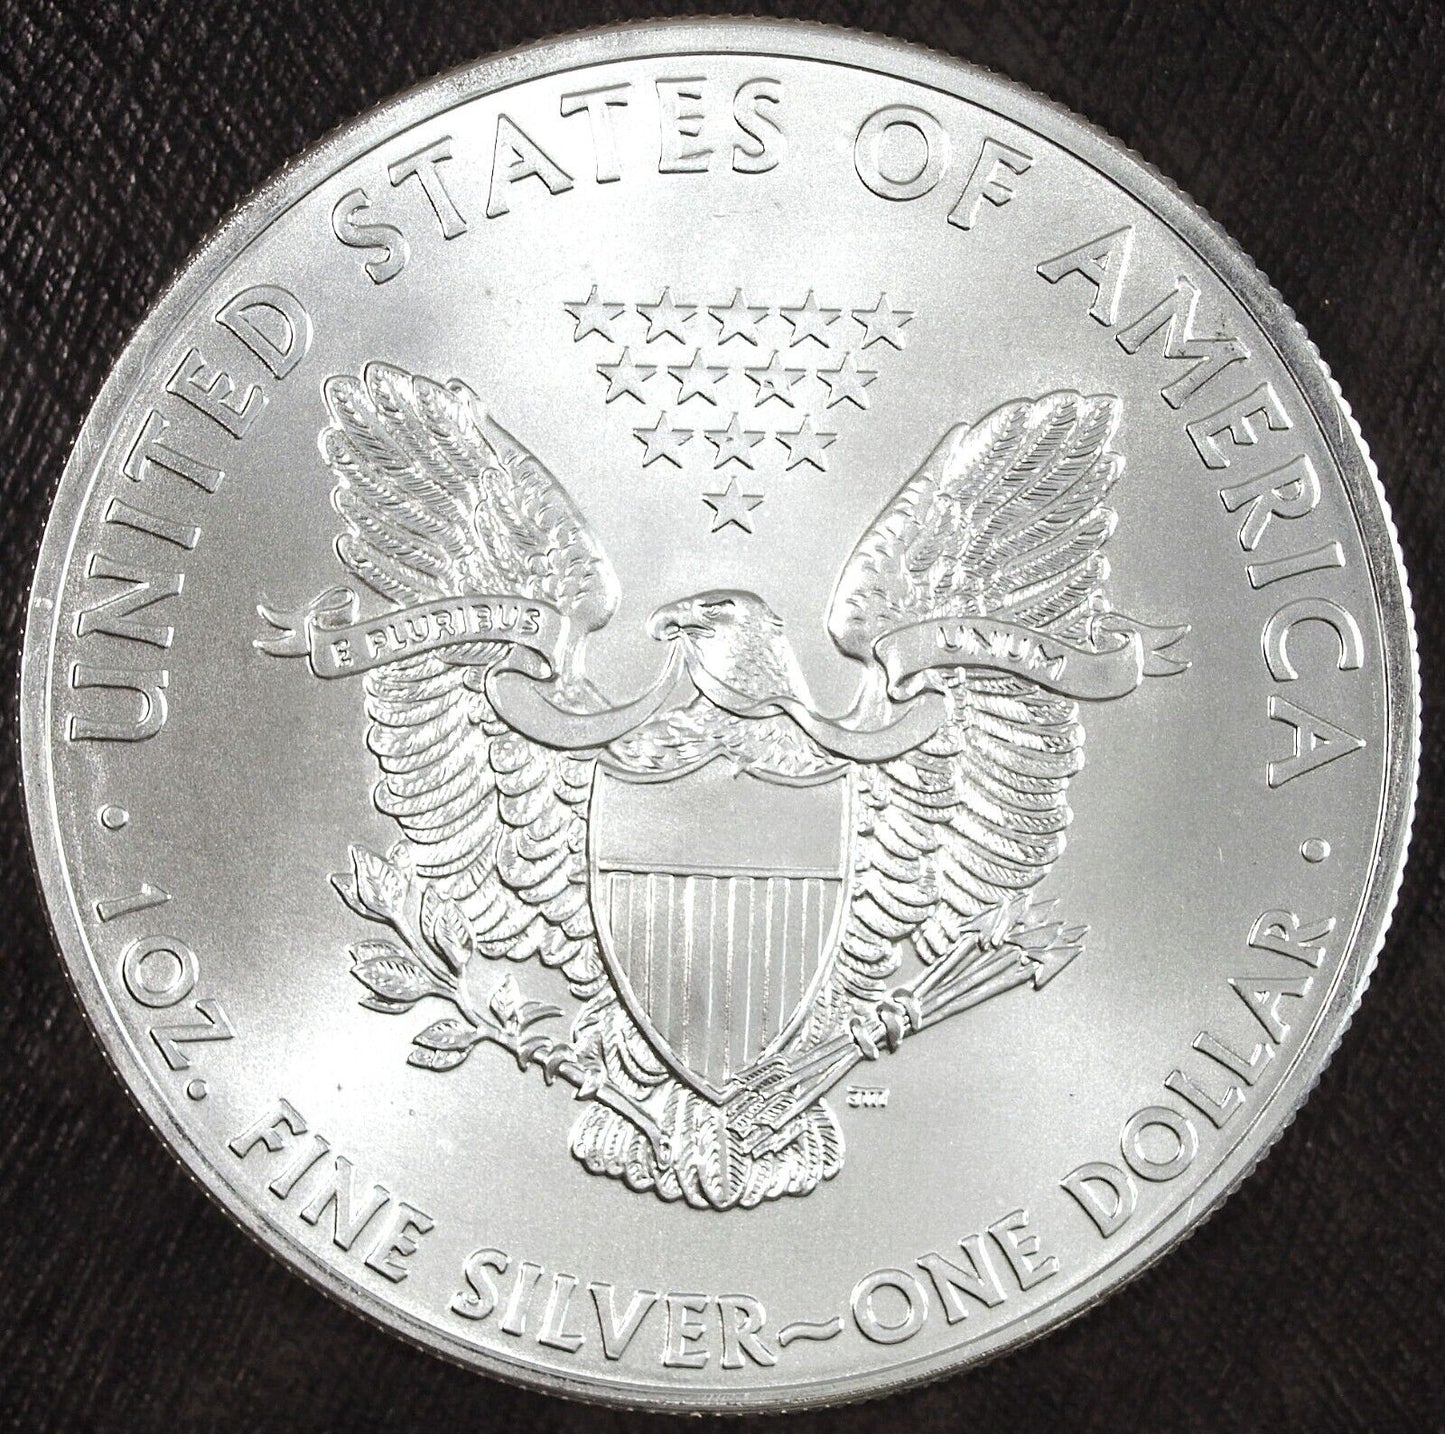 2015 U.S. Mint American Silver Eagle ☆☆ Uncirculated ☆☆ Great Collectible 604